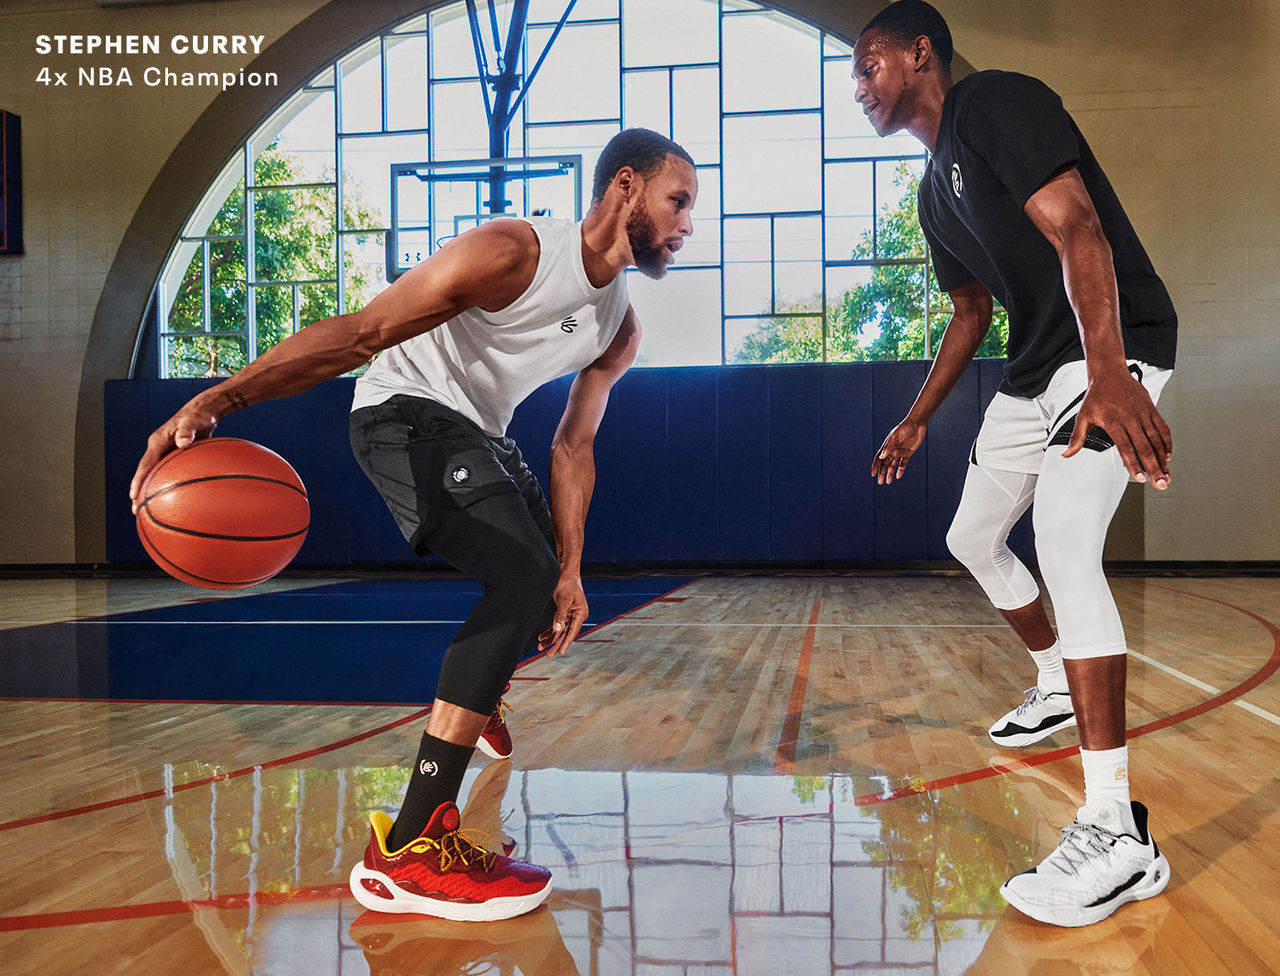 UNDER ARMOUR AND STEPHEN CURRY ENTER LONG-TERM PARTNERSHIP